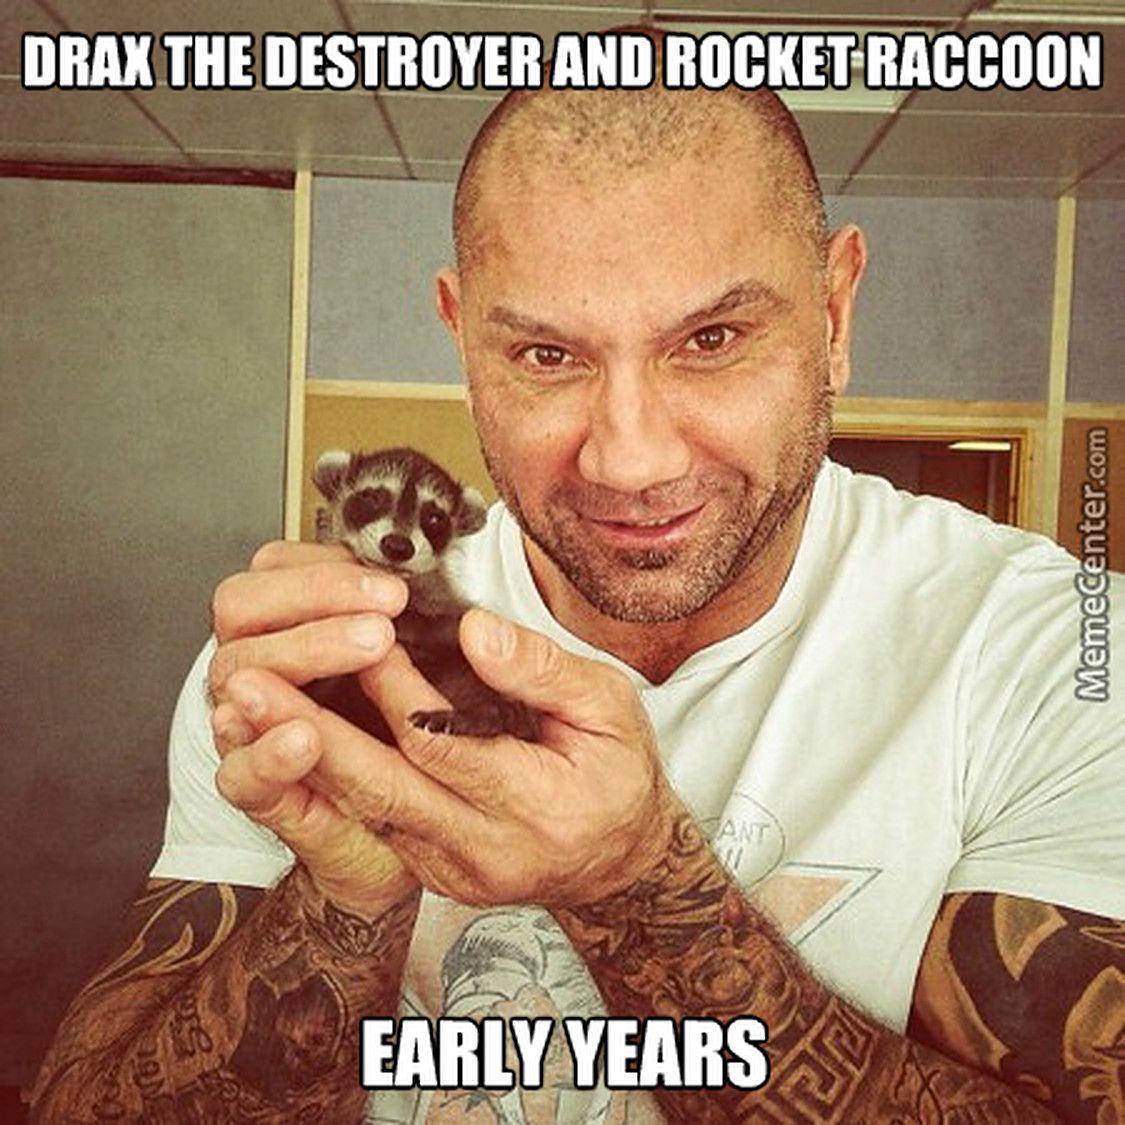 Meme of Dave Bautista holding a baby raccoon meant to be Rocket